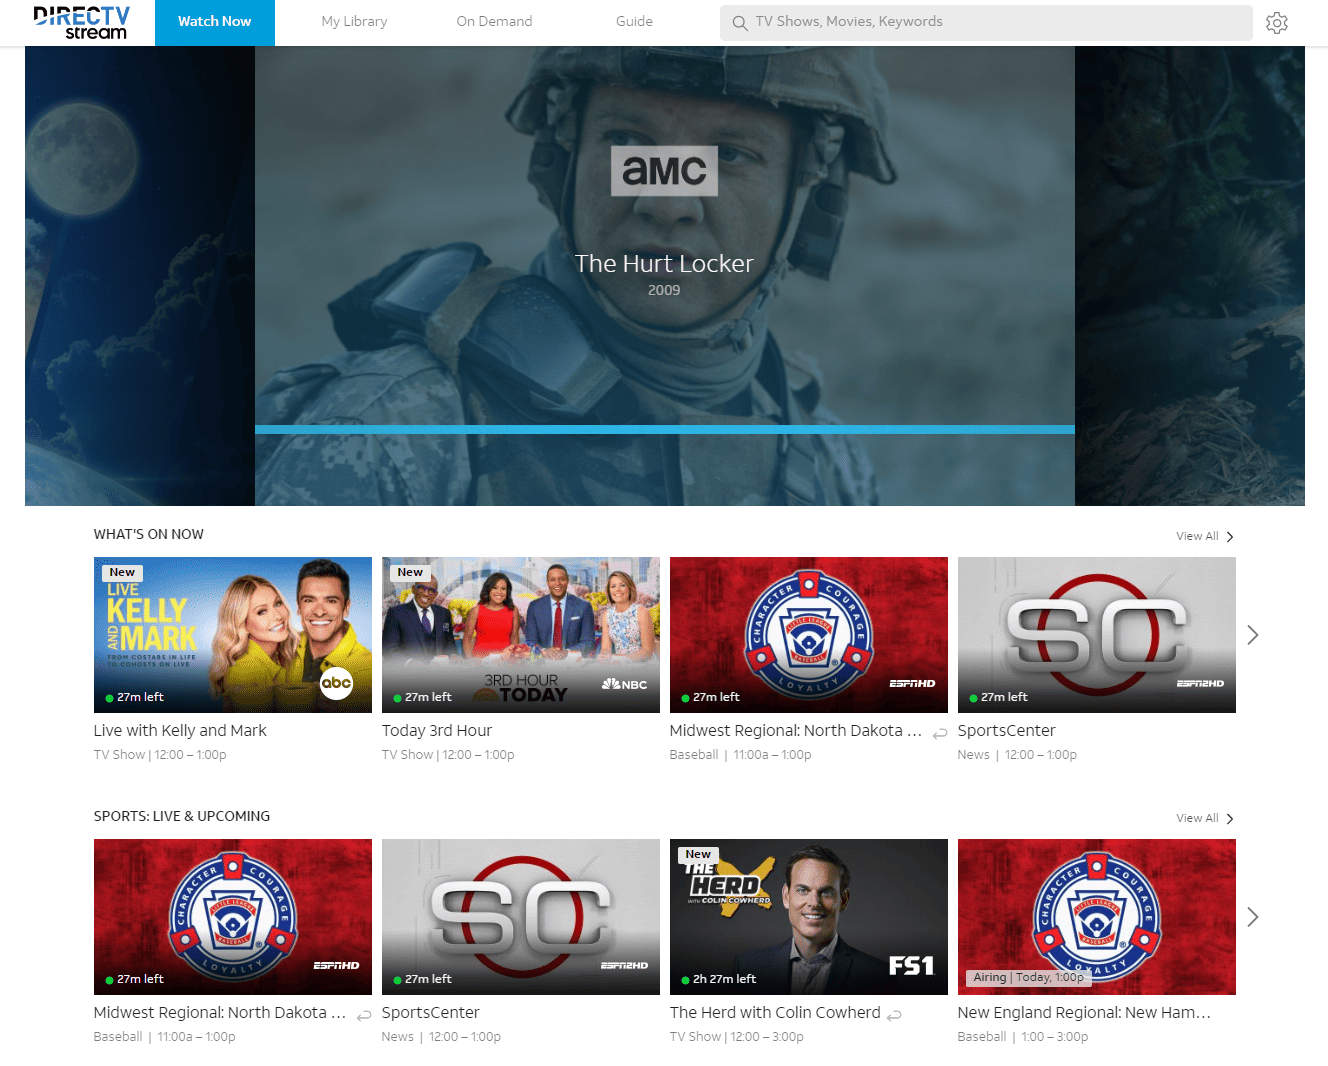 Image of movies and live sports under the “Watch Now” tab on DIRECTV via Internet